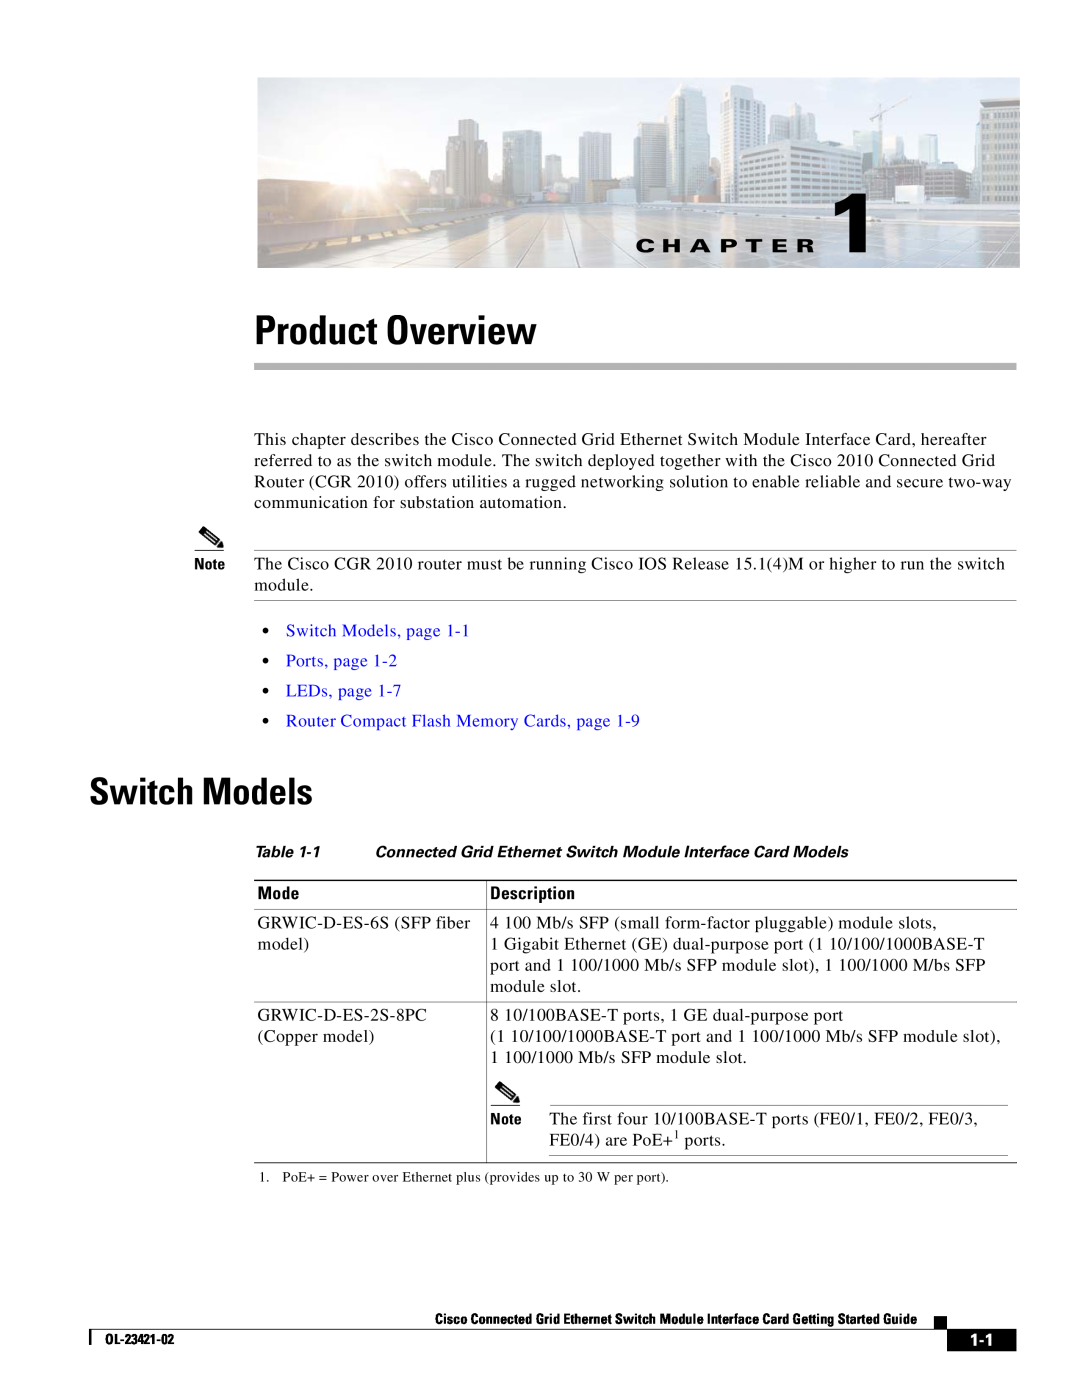 Cisco Systems OL-23421-02 manual Product Overview, C H A P T E R, Switch Models, page Ports, page LEDs, page 